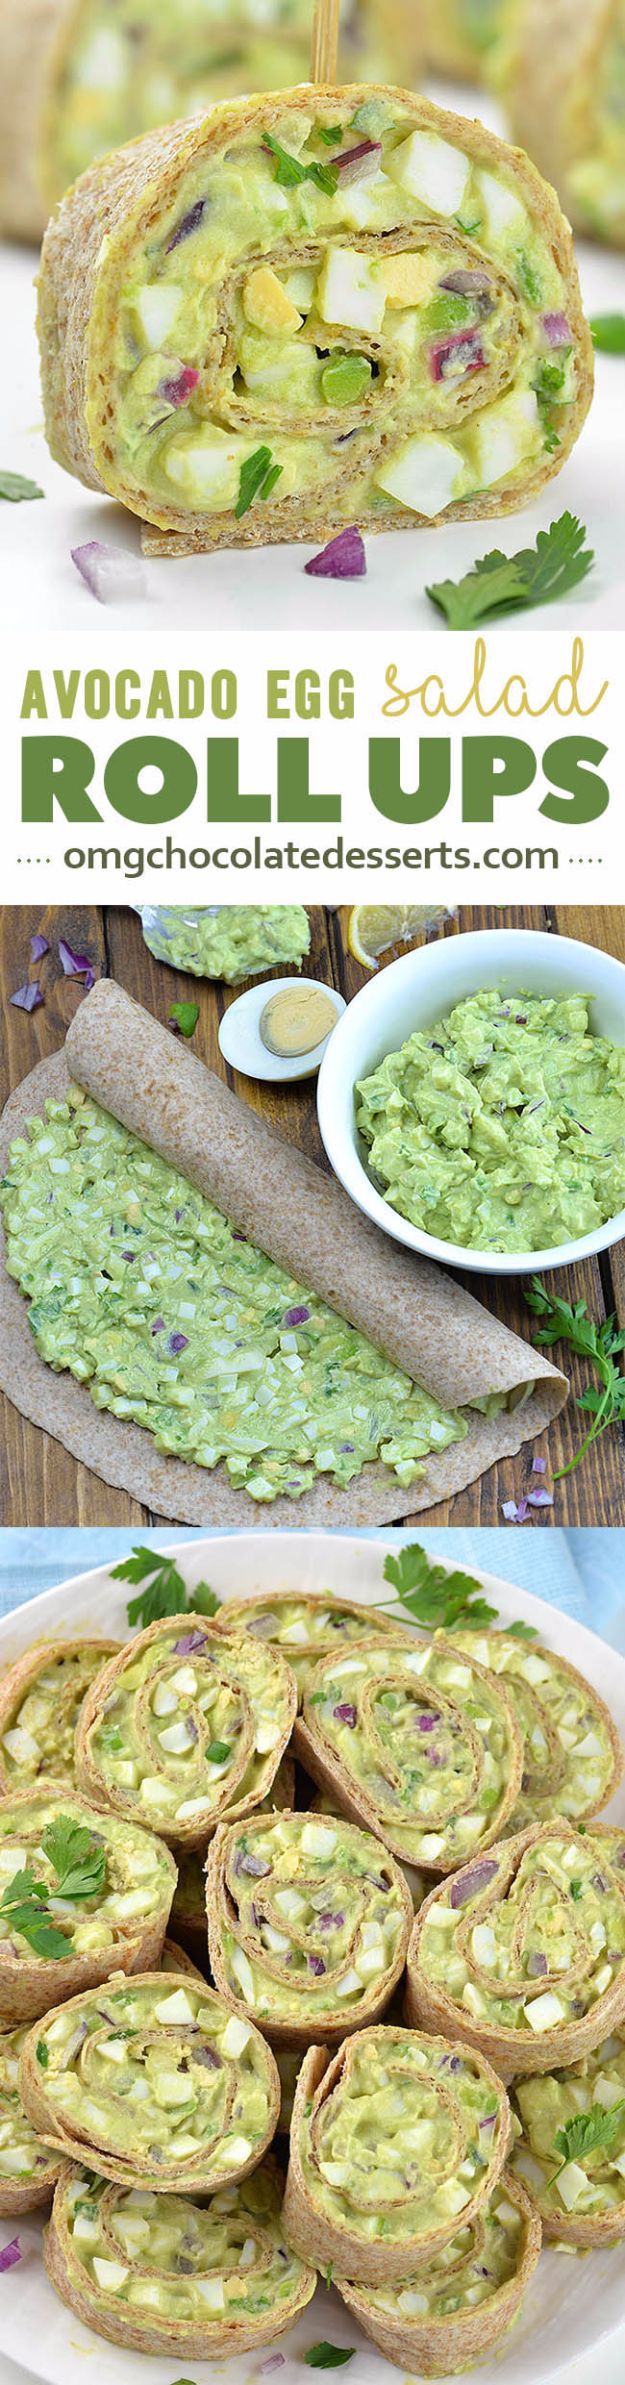 Best Recipe Ideas for Summer - Avocado Egg Salad Roll Ups - Cool Salads, Easy Side Dishes, Recipes for Summer Foods and Dinner to Beat the Heat - Light and Healthy Ideas for Hot Summer Nights, Pool Parties and Picnics http://diyjoy.com/best-recipes-summer